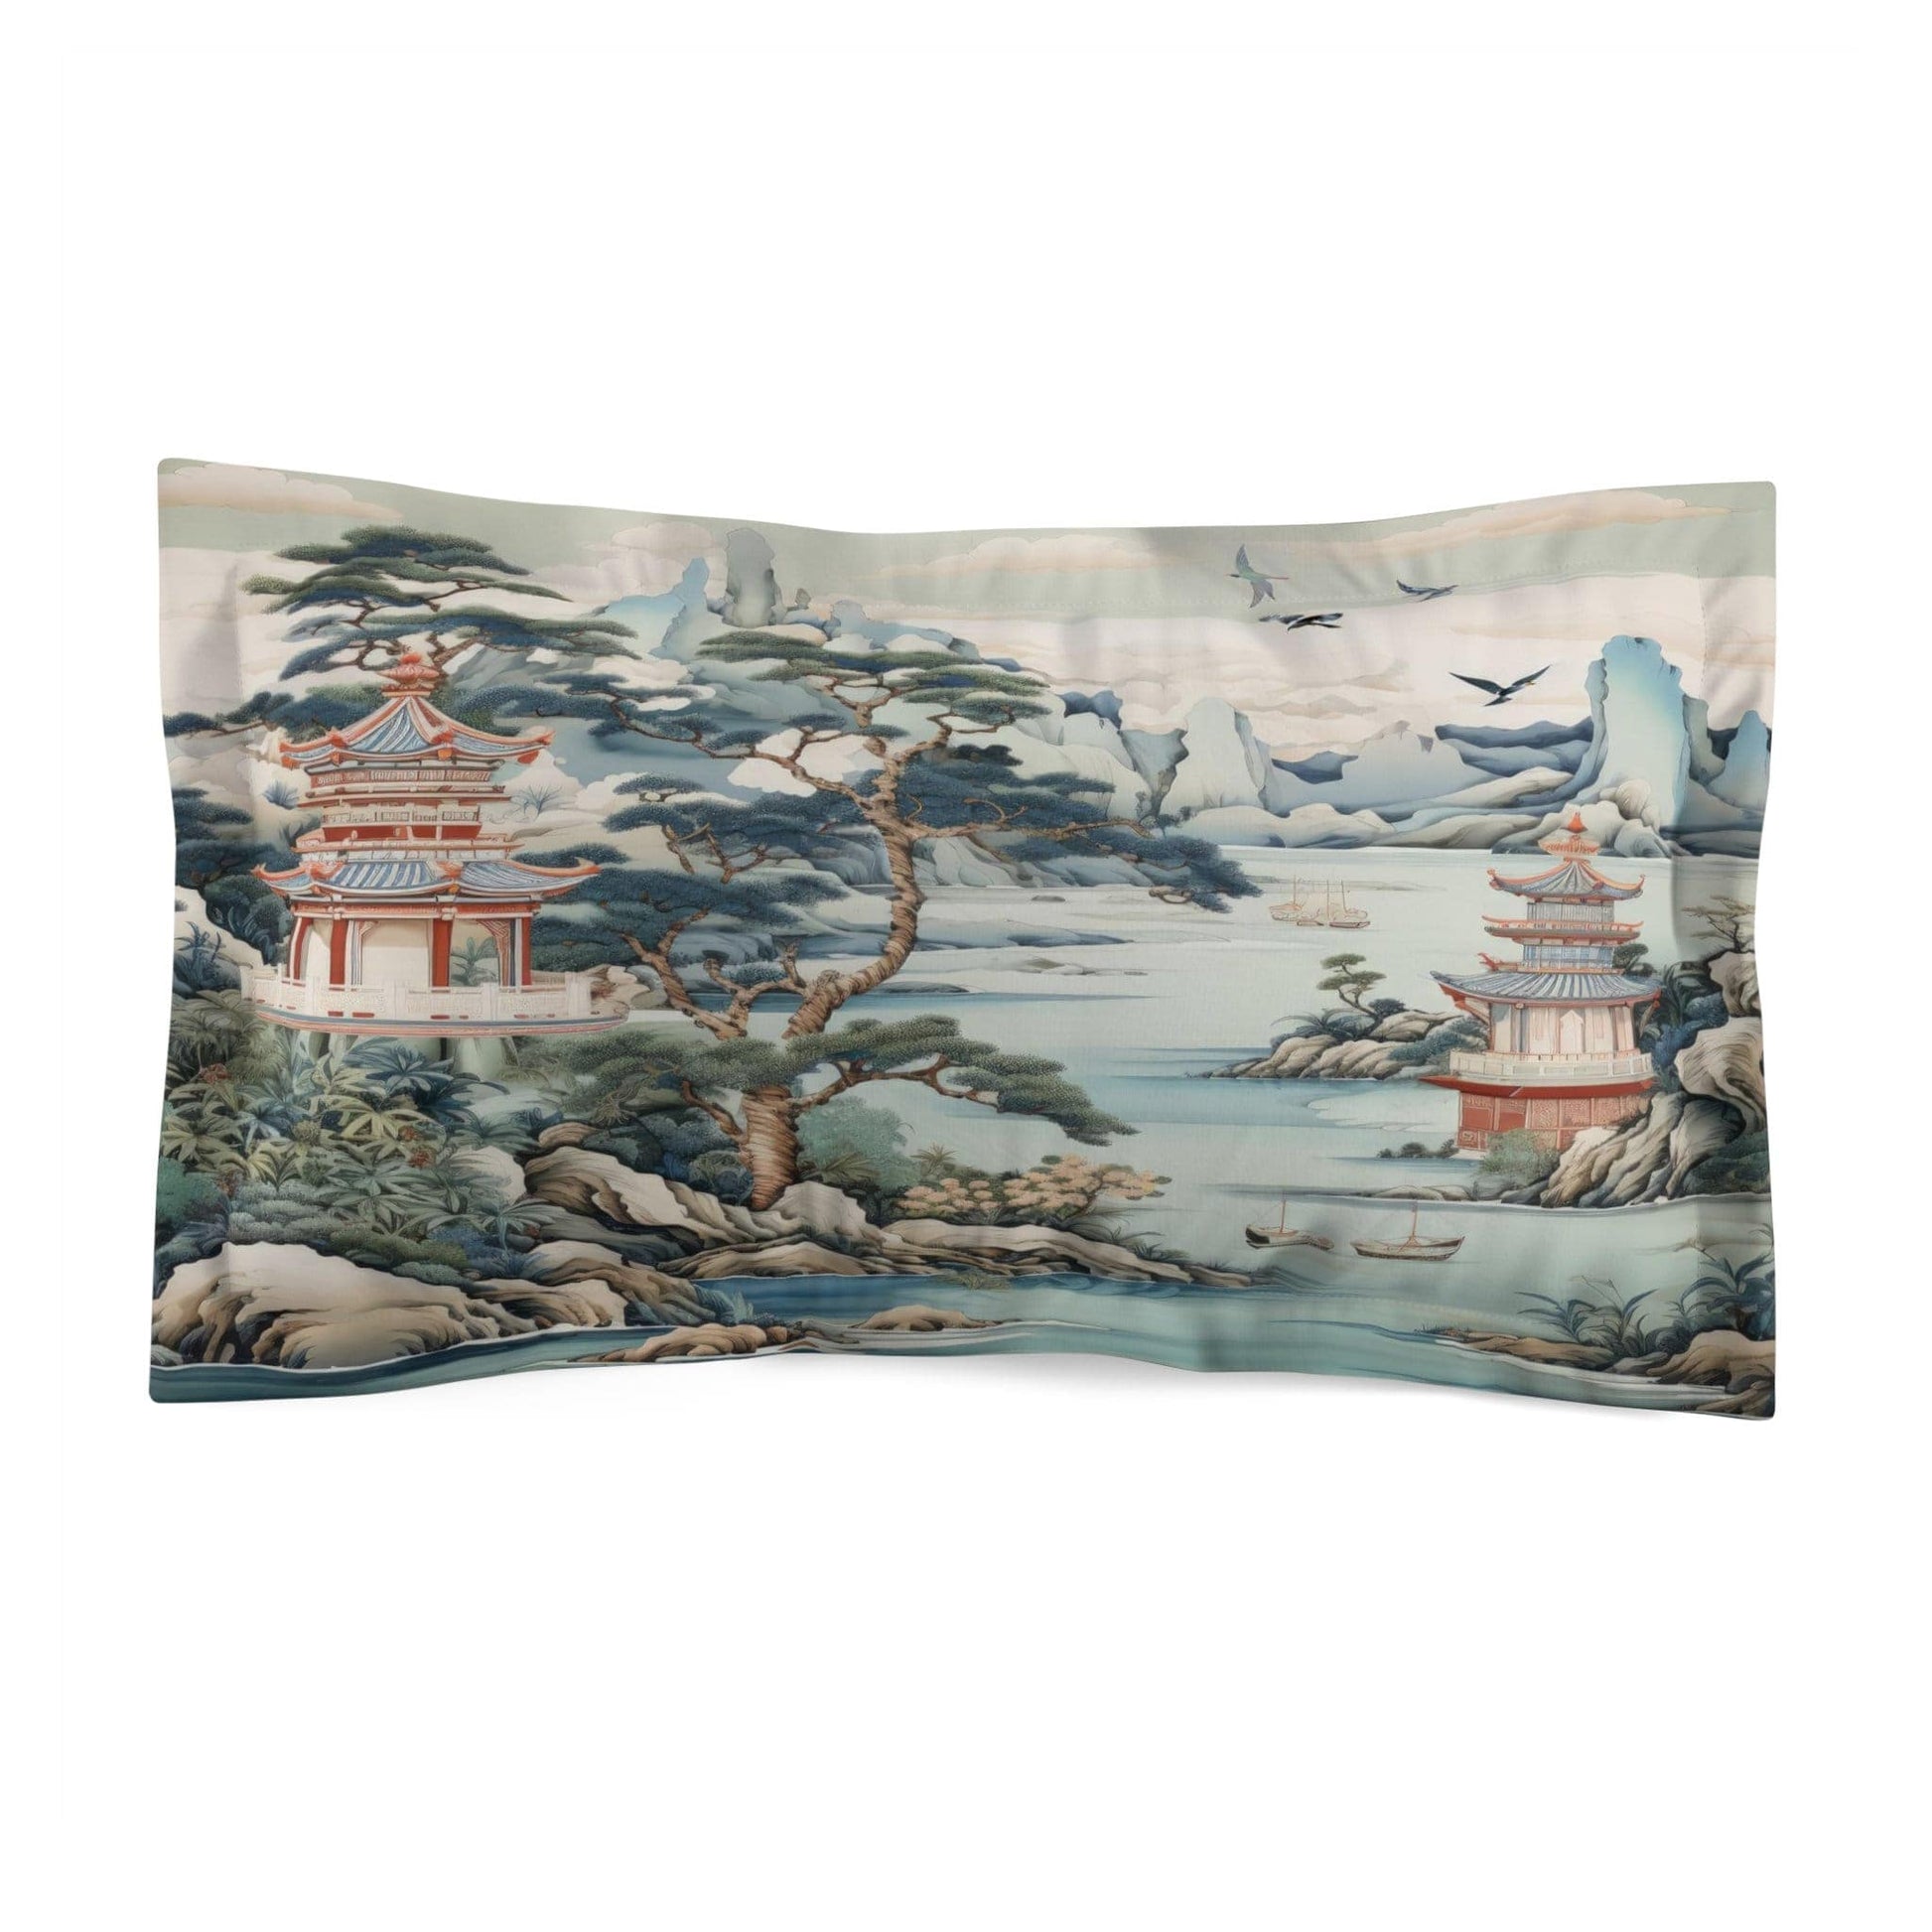 Kate McEnroe New York Chinoiserie Pagoda Landscape Floral Pillow Sham, Country Farmhouse Grandmillenial Bedroom Pillows, Rustic Chic Bedroom Decor -  121281023 Pillow Shams